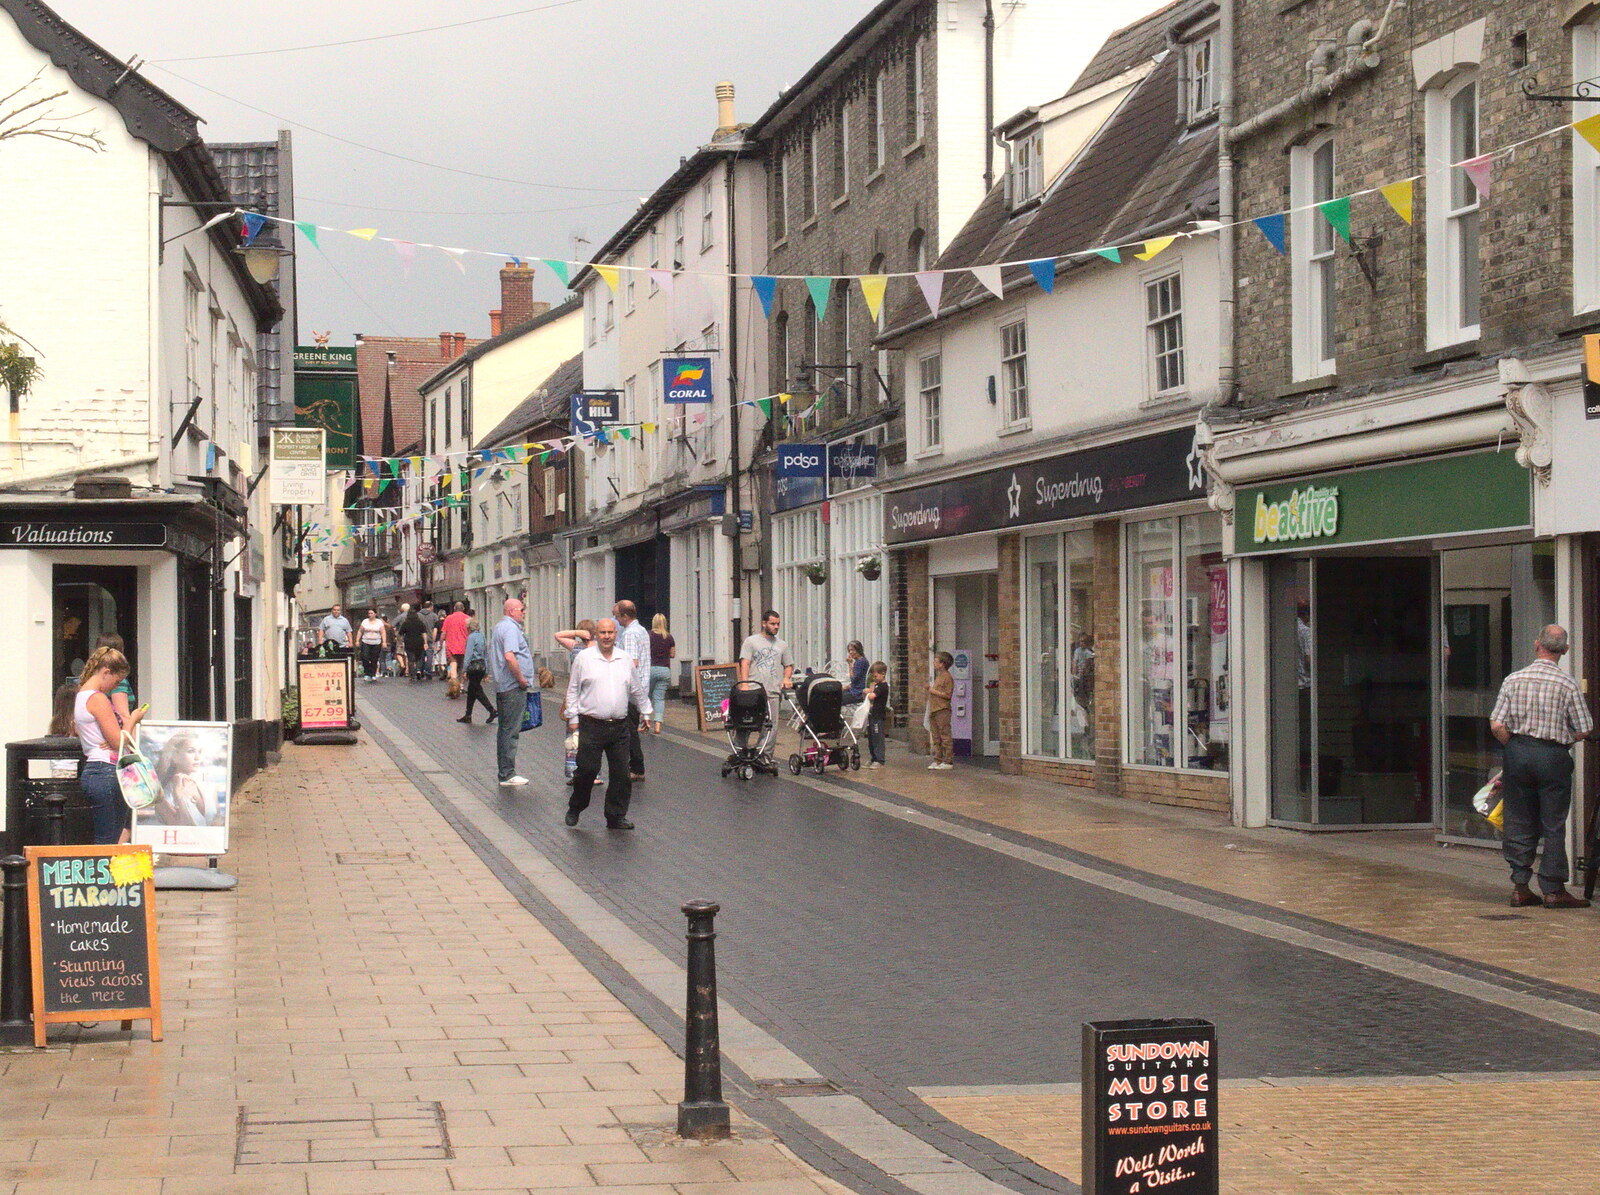 Mere Street in Diss from The BSCC at Harleston, and a Visit From Cambridge, Brome, Suffolk - 31st July 2014